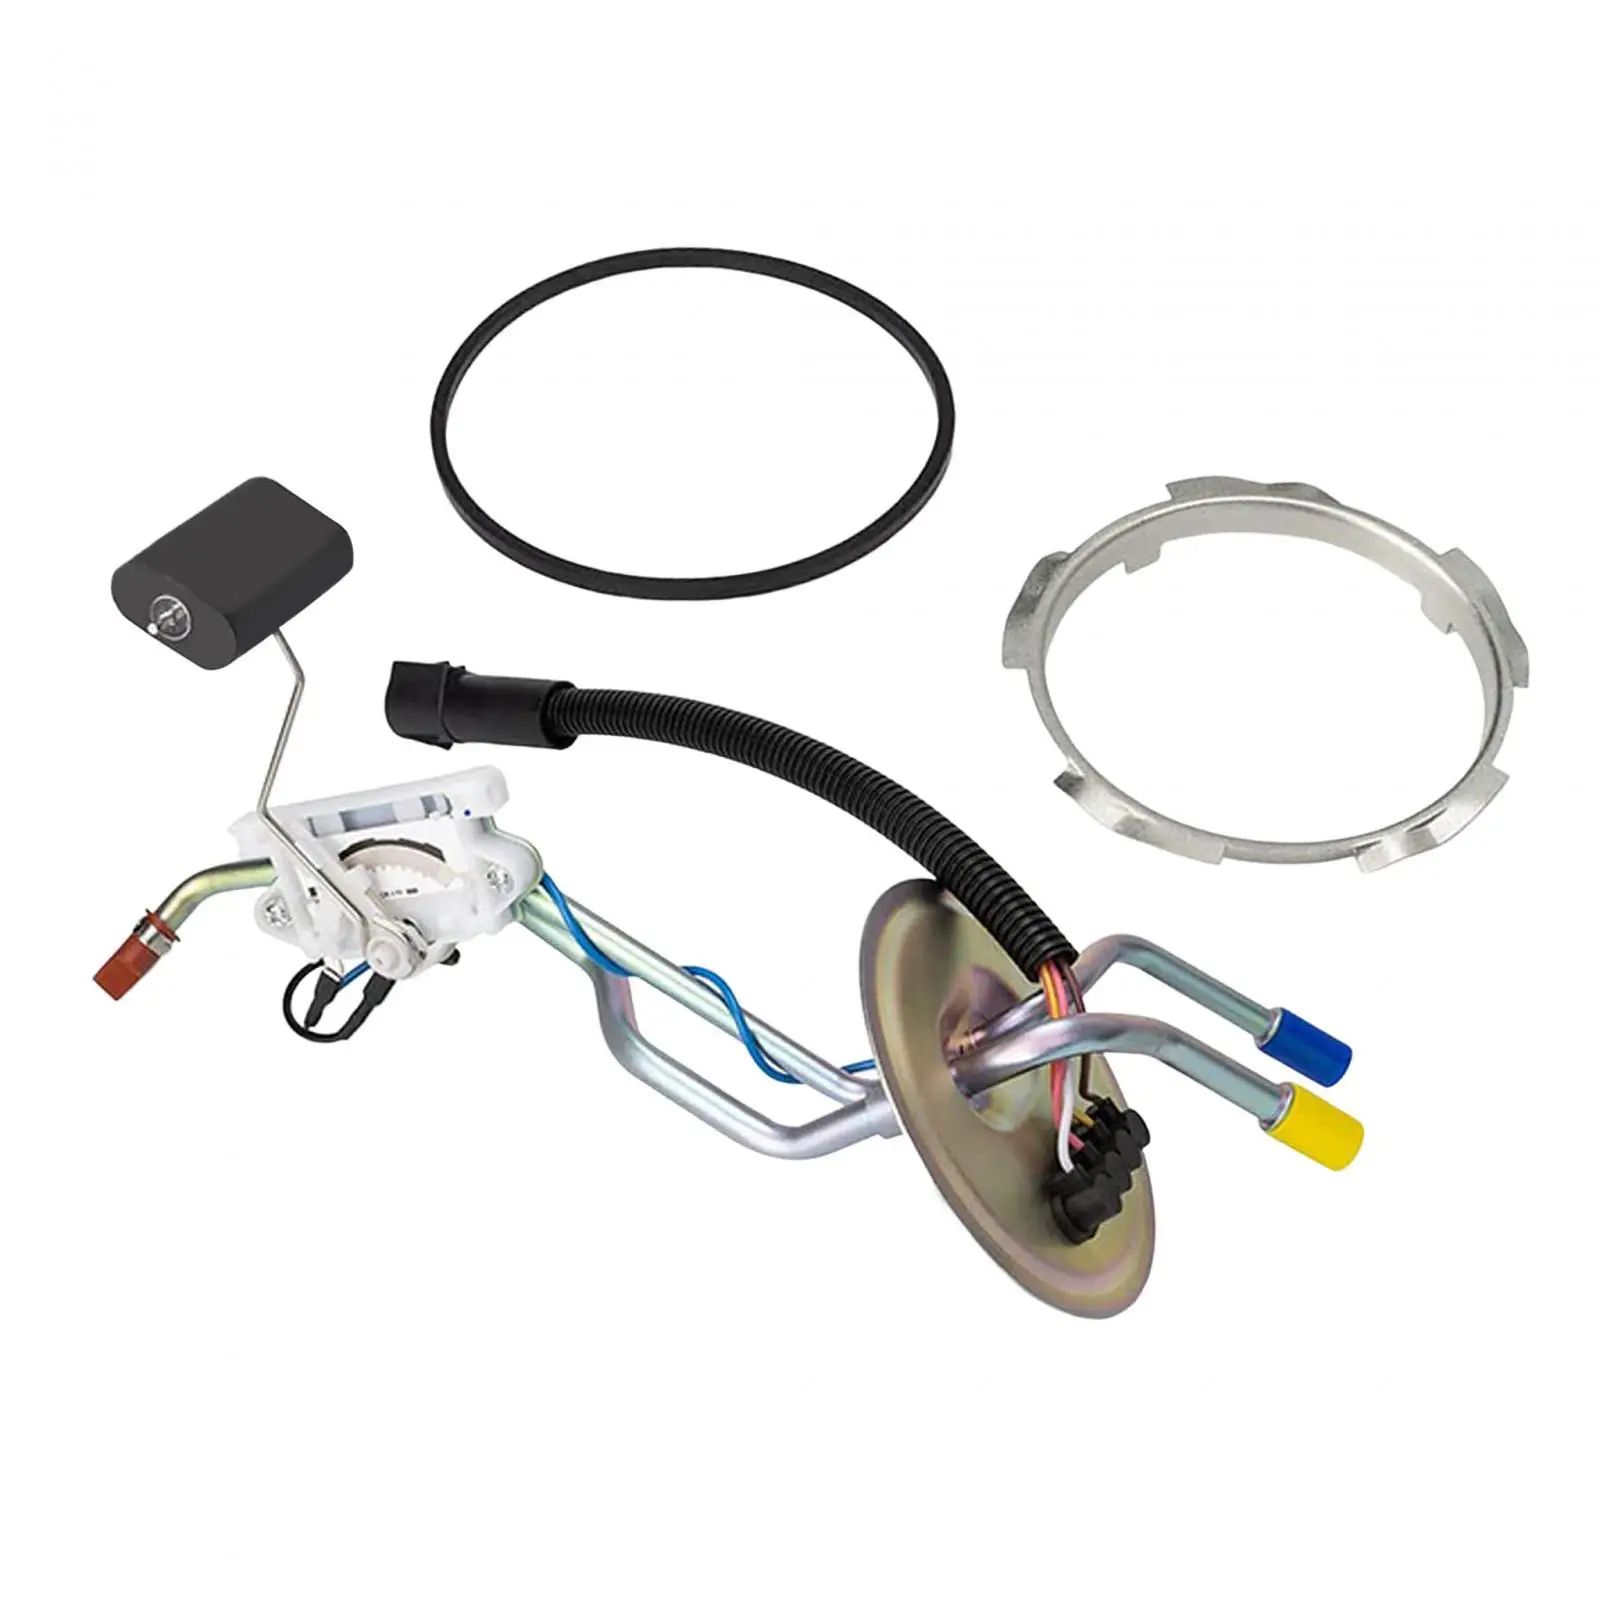 Diesel Fuel Sending Unit Fmsu-9der Repair Parts for Ford F250 F350 1994-1997 Easily to Install Durable Accessories